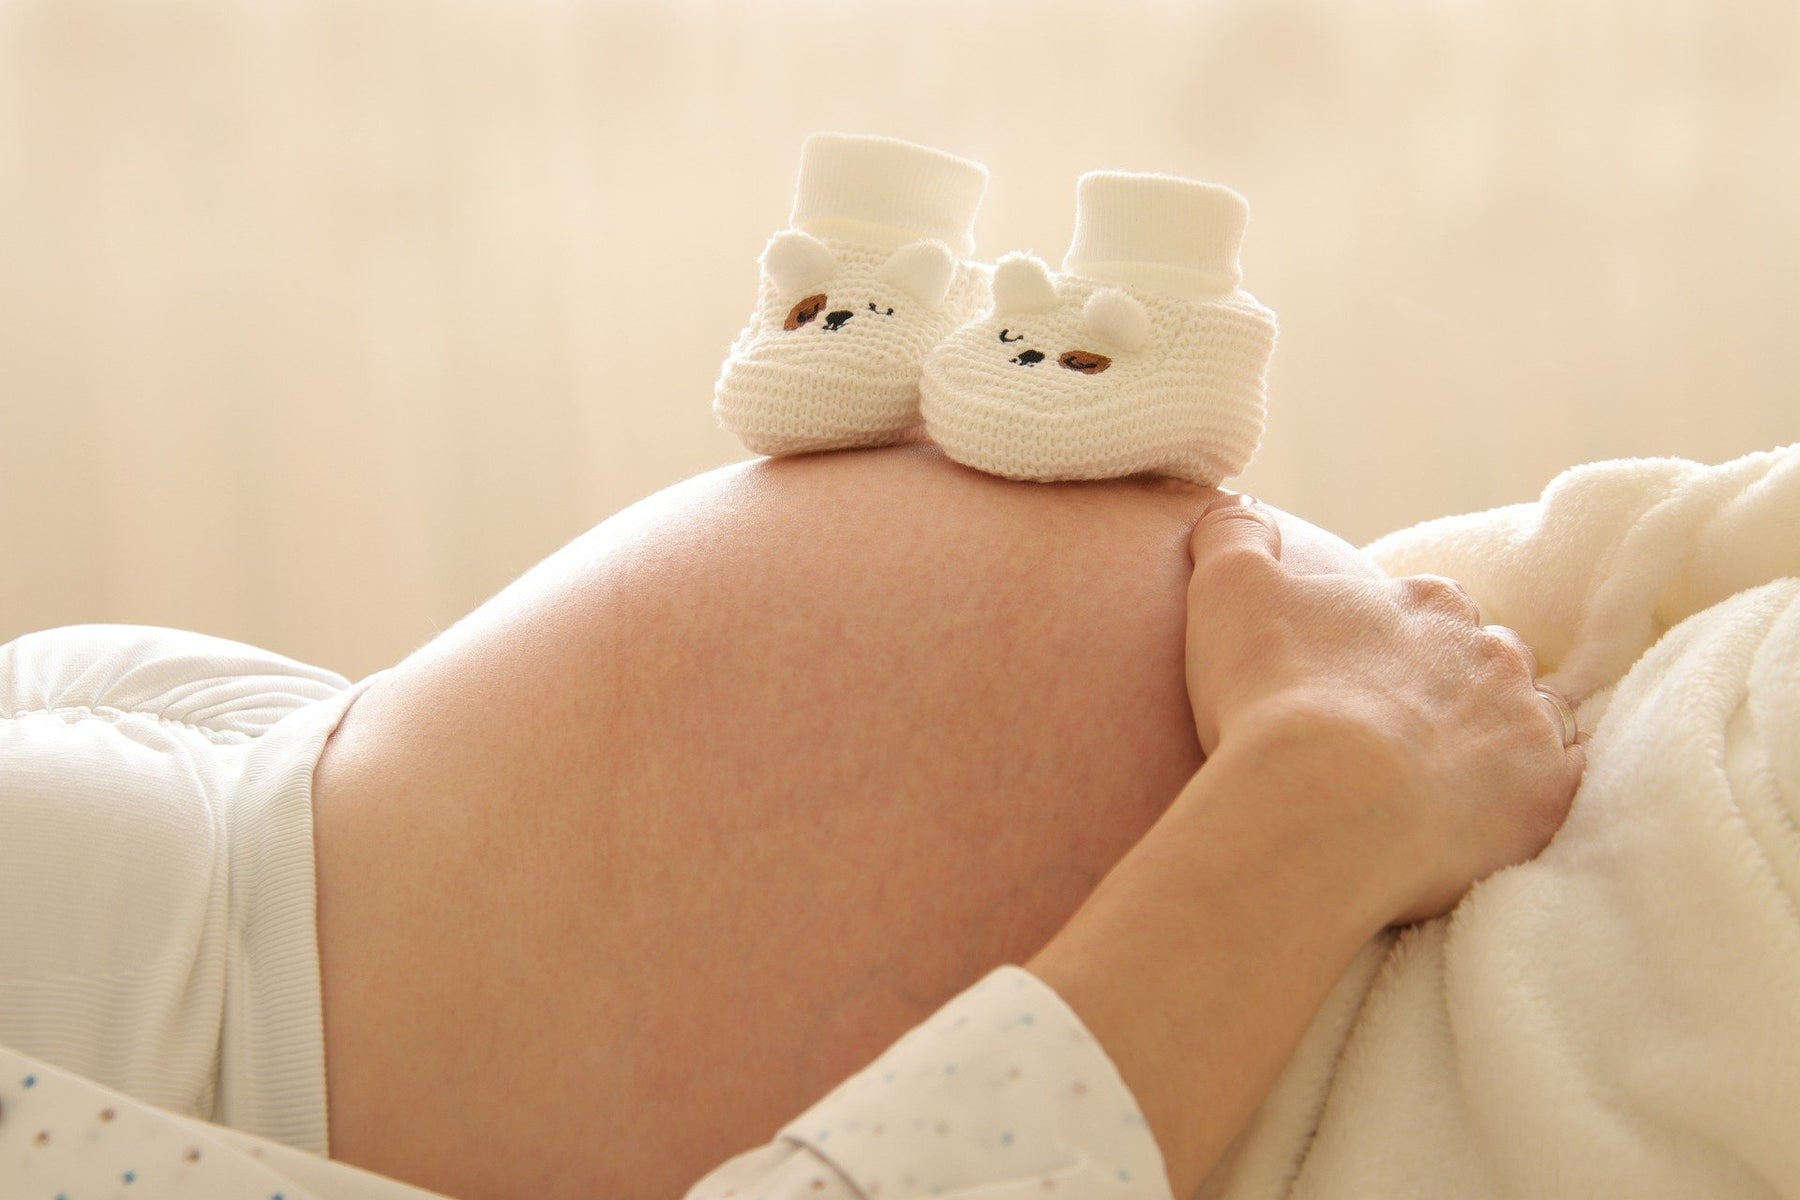 Pregnant woman's belly with socks-like shoes sitting on top of the belly